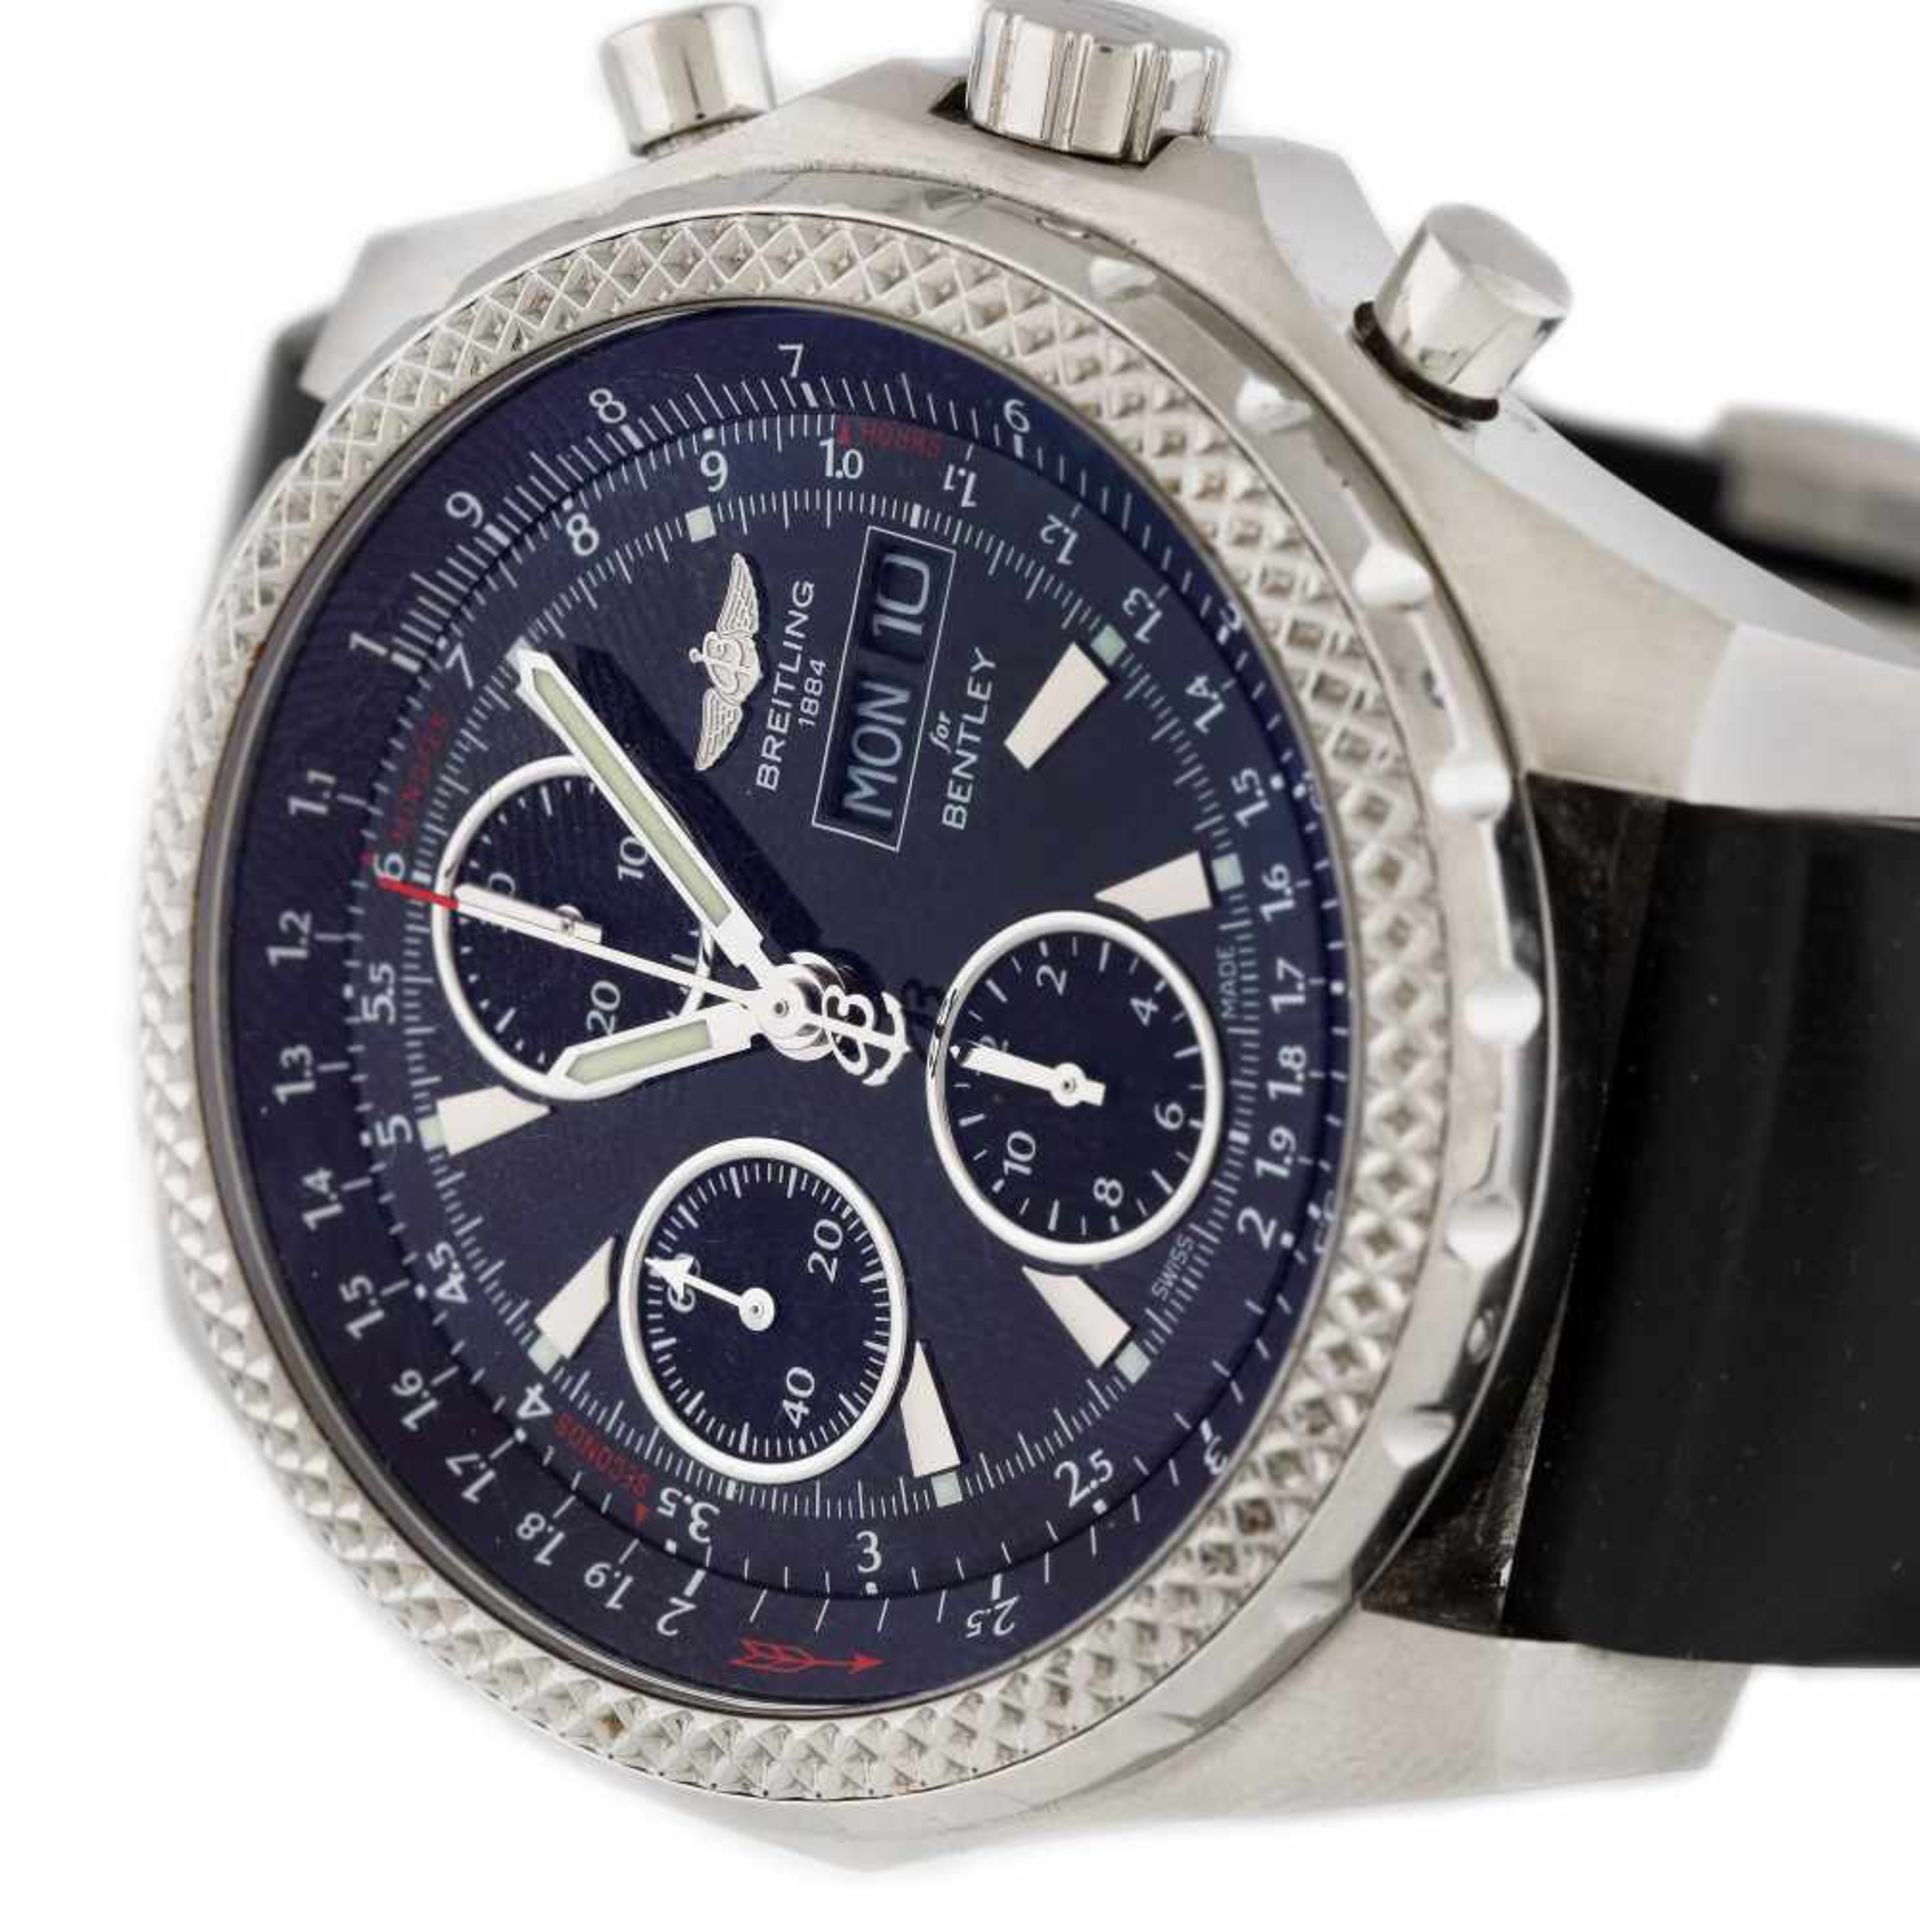 Breitling wristwatch, made for Bentley, men - Image 2 of 3